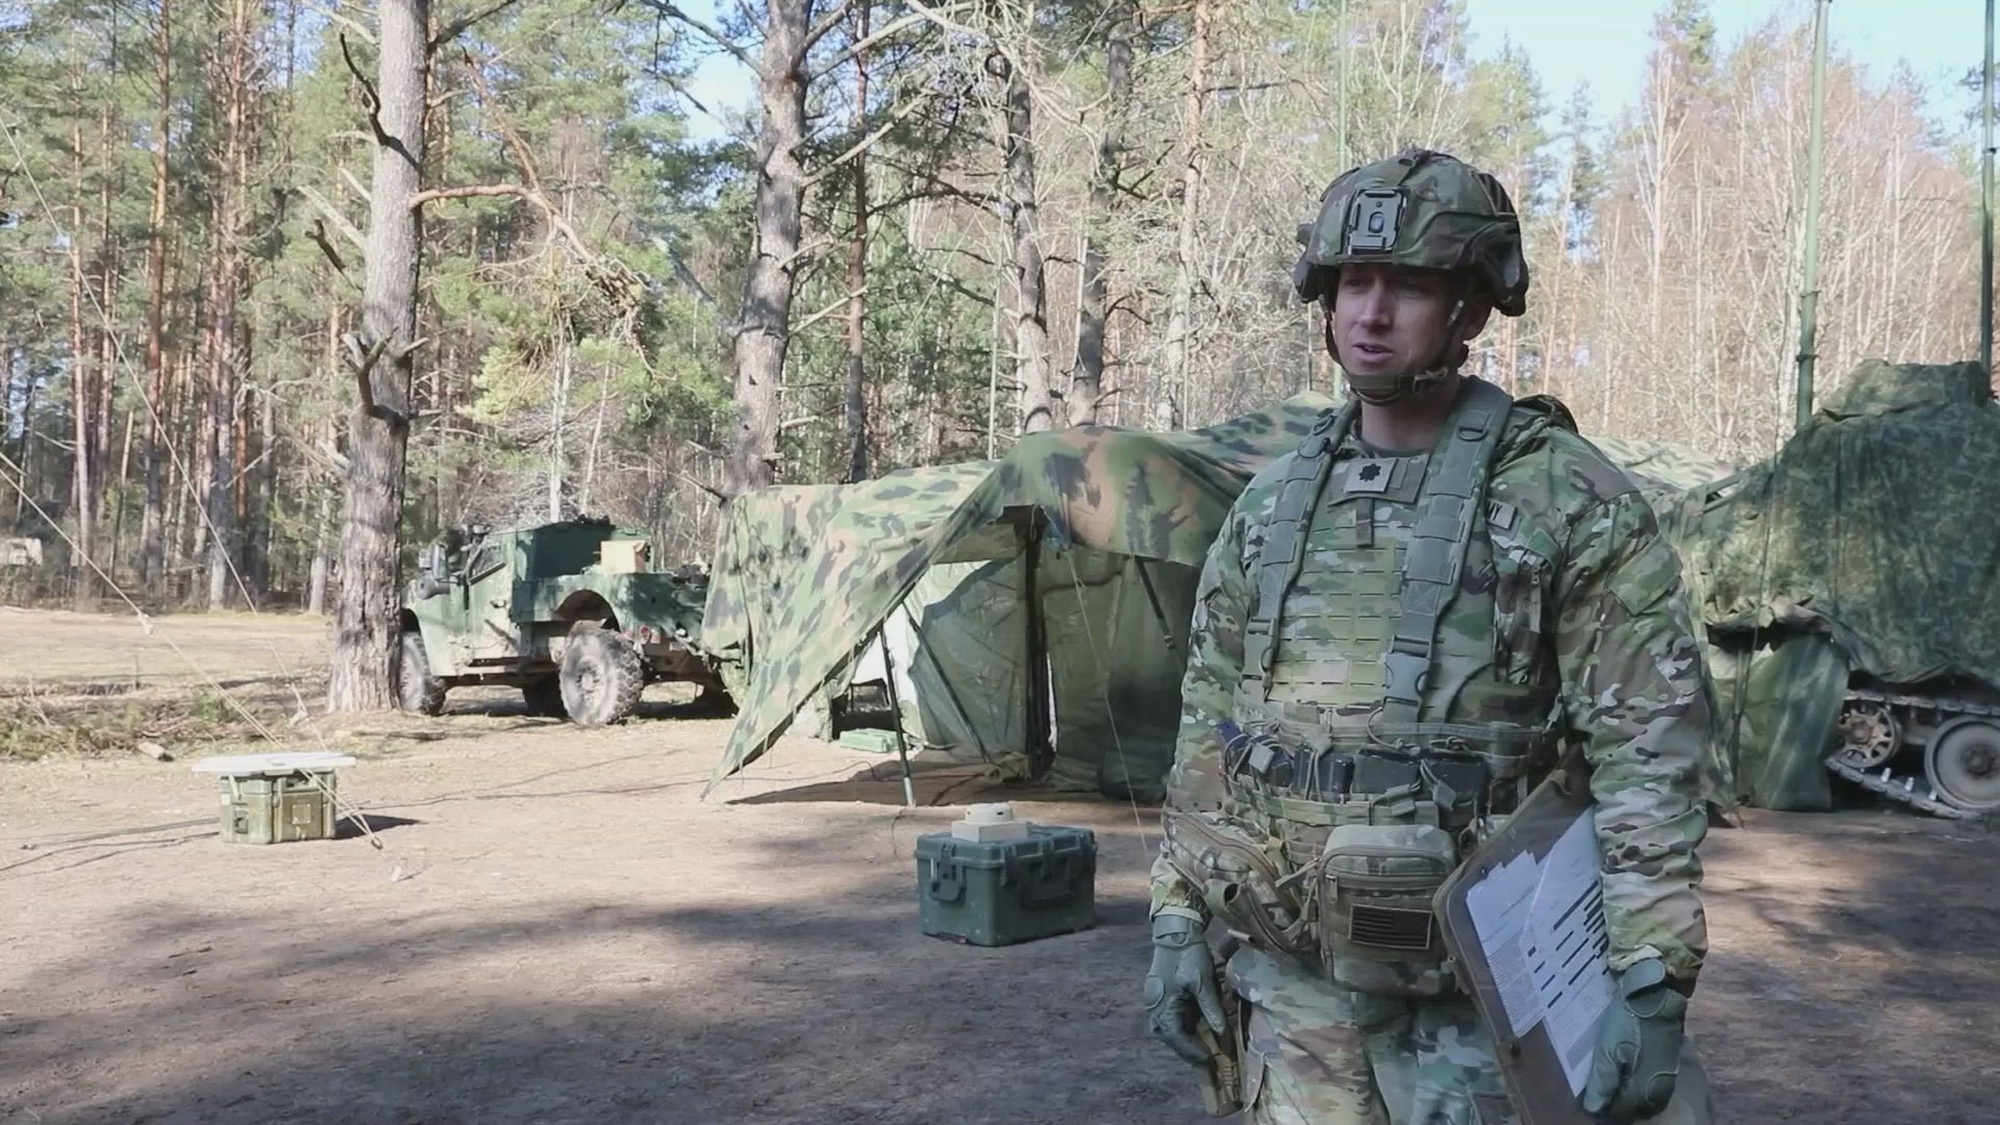 Lt. Col. Ben Maher, commander of 1st Battalion, 9th Field Artillery Regiment, 2nd Armored Brigade Combat Team, 3rd Infantry Division, talks about his unit conducting a battalion-wide Table XVIII field training exercise held at the Pabrade Training Area, Lithuania, March 26, 2024. Charlie Battery, along with the rest of the 1st Bn., 9th FAR and Lithuanian partners, practiced massing their fires in one location in a seamless display of interoperability and lethality. The 3rd Infantry Division’s mission in Europe is to engage in multinational training and exercises across the continent, working alongside NATO Allies and regional security partners to provide combat-credible forces to V Corps, America’s forward-deployed corps in Europe. (U.S. Army video by Sgt. Anthony Ford)